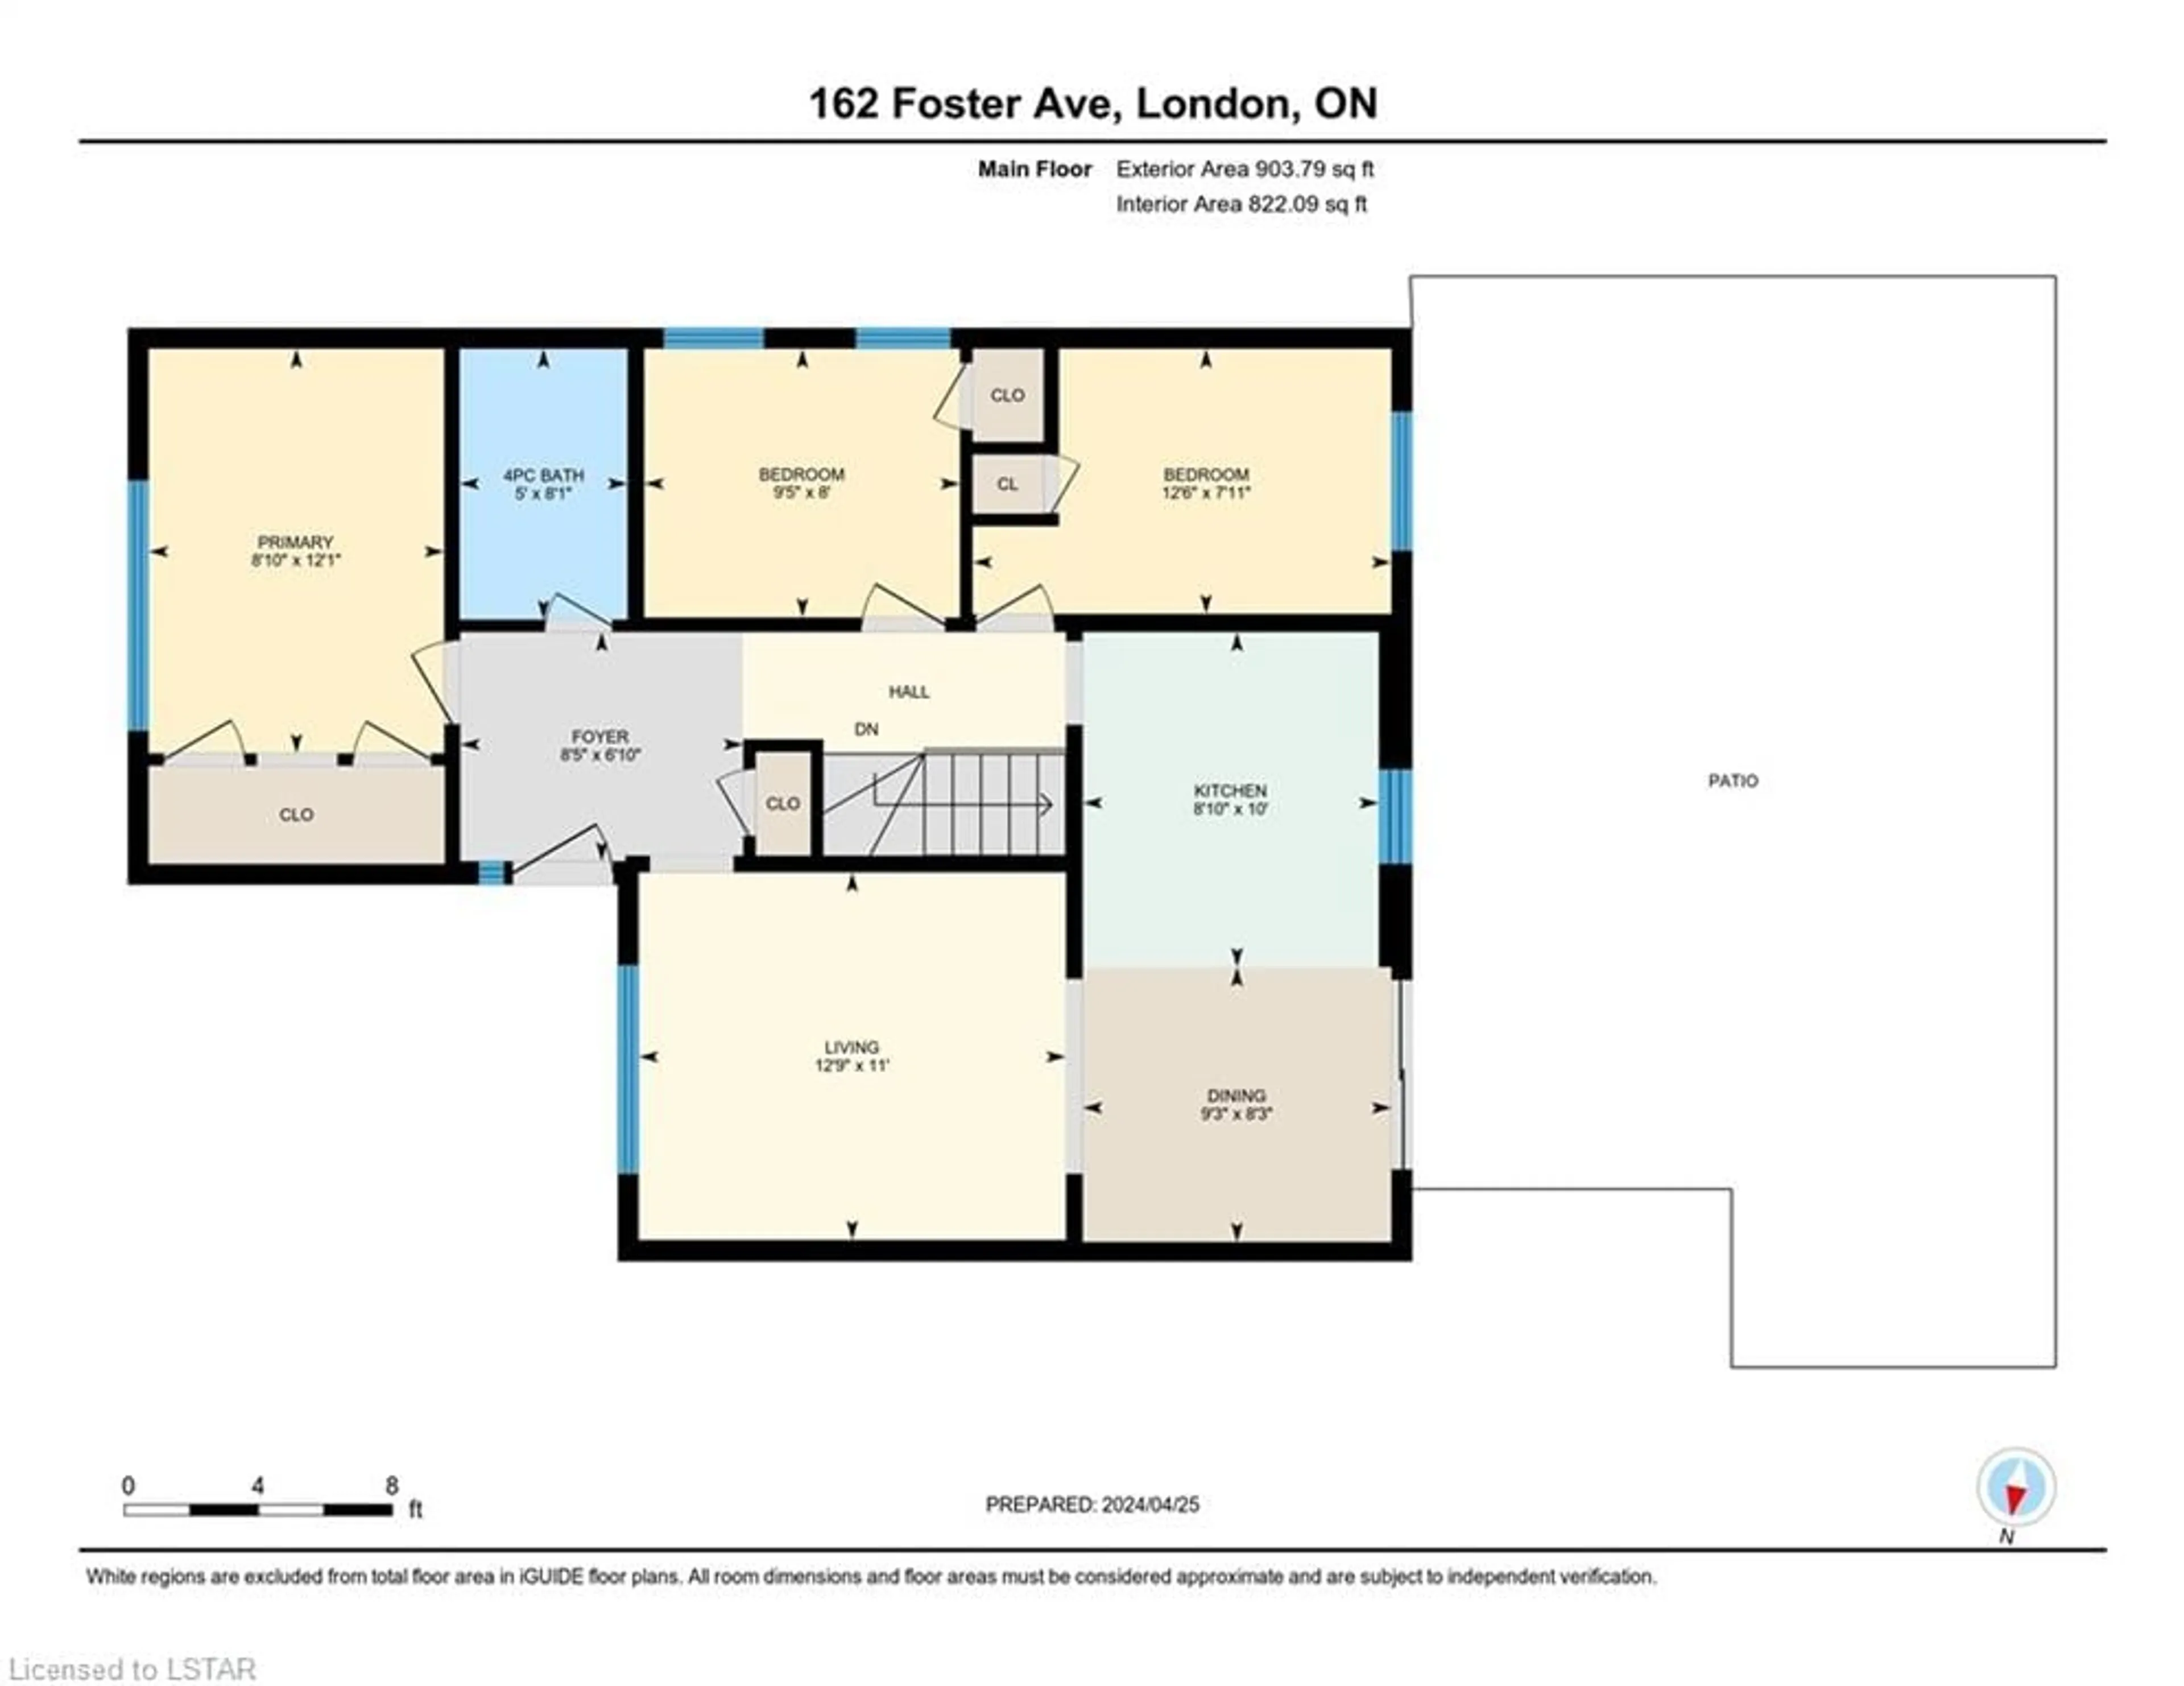 Floor plan for 162 Foster Ave, London Ontario N6H 2L1